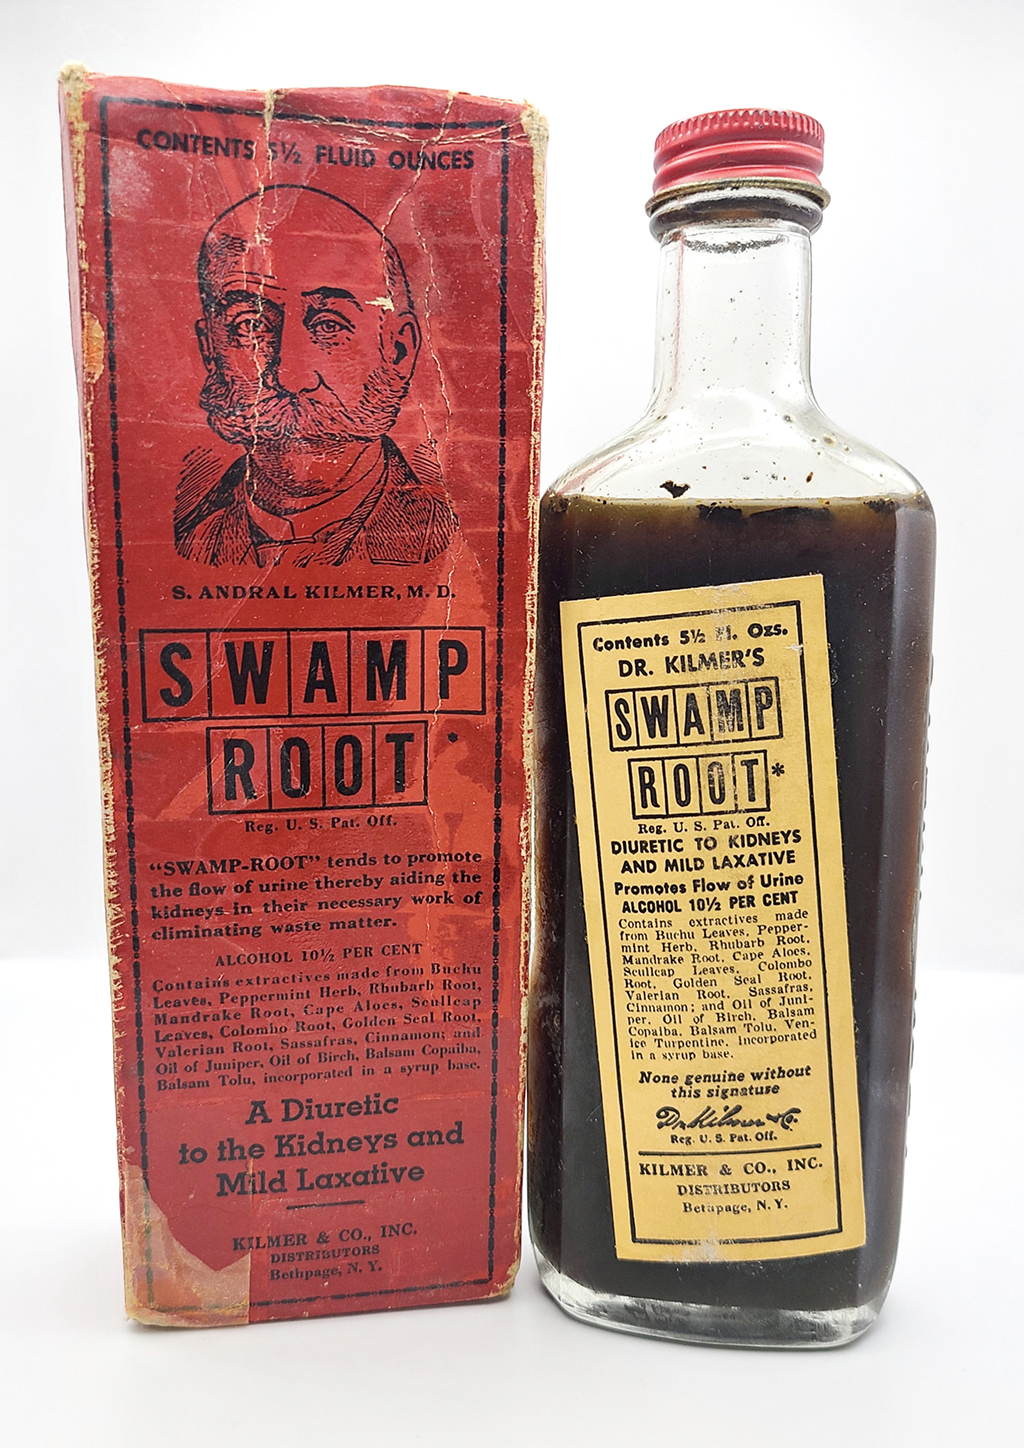 A red bottle with a face and the title "swamp root" sits next to a bottle filled with brown liquid with a matching label